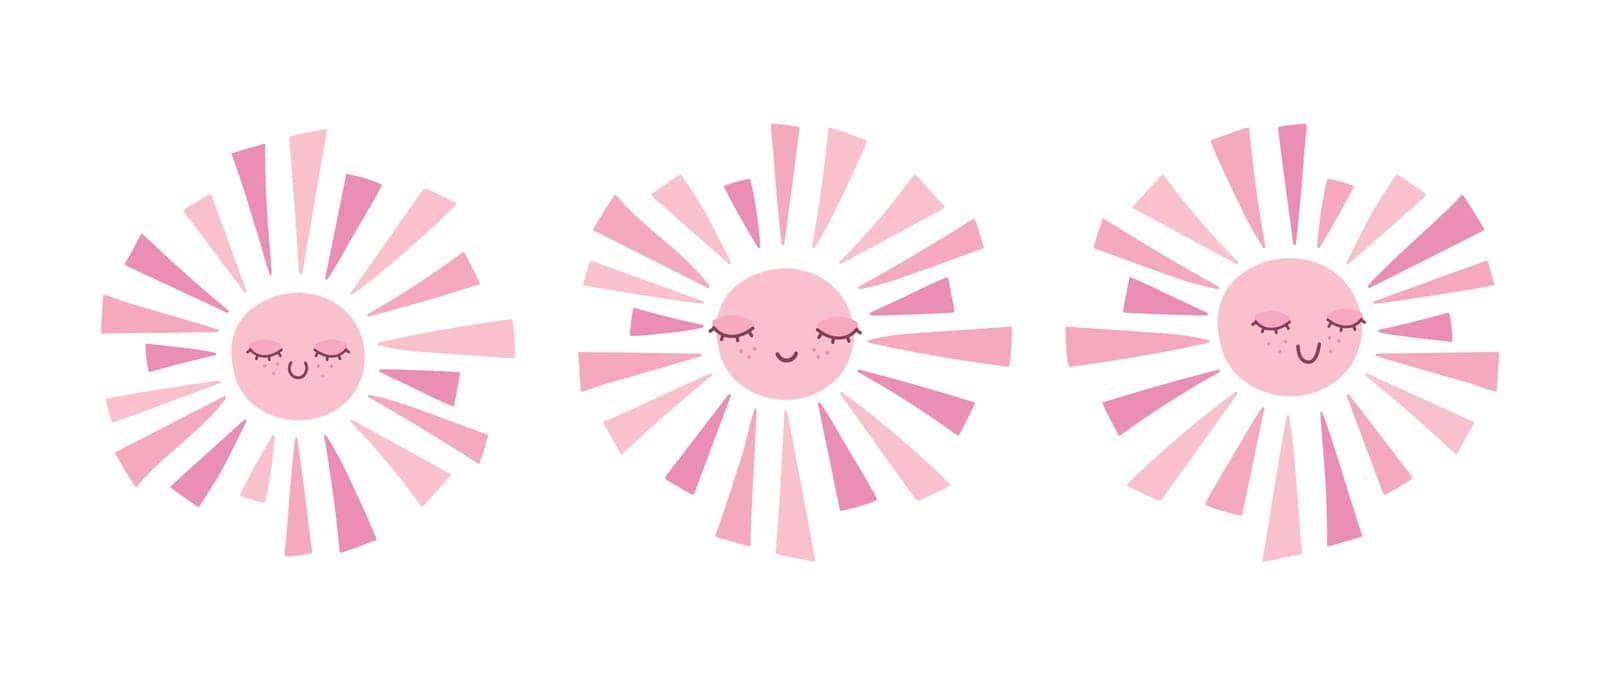 Cute hand drawn smiling sun in pink color set. Scandinavian style decoration for nursery kids room. Vector illustration  by psychoche